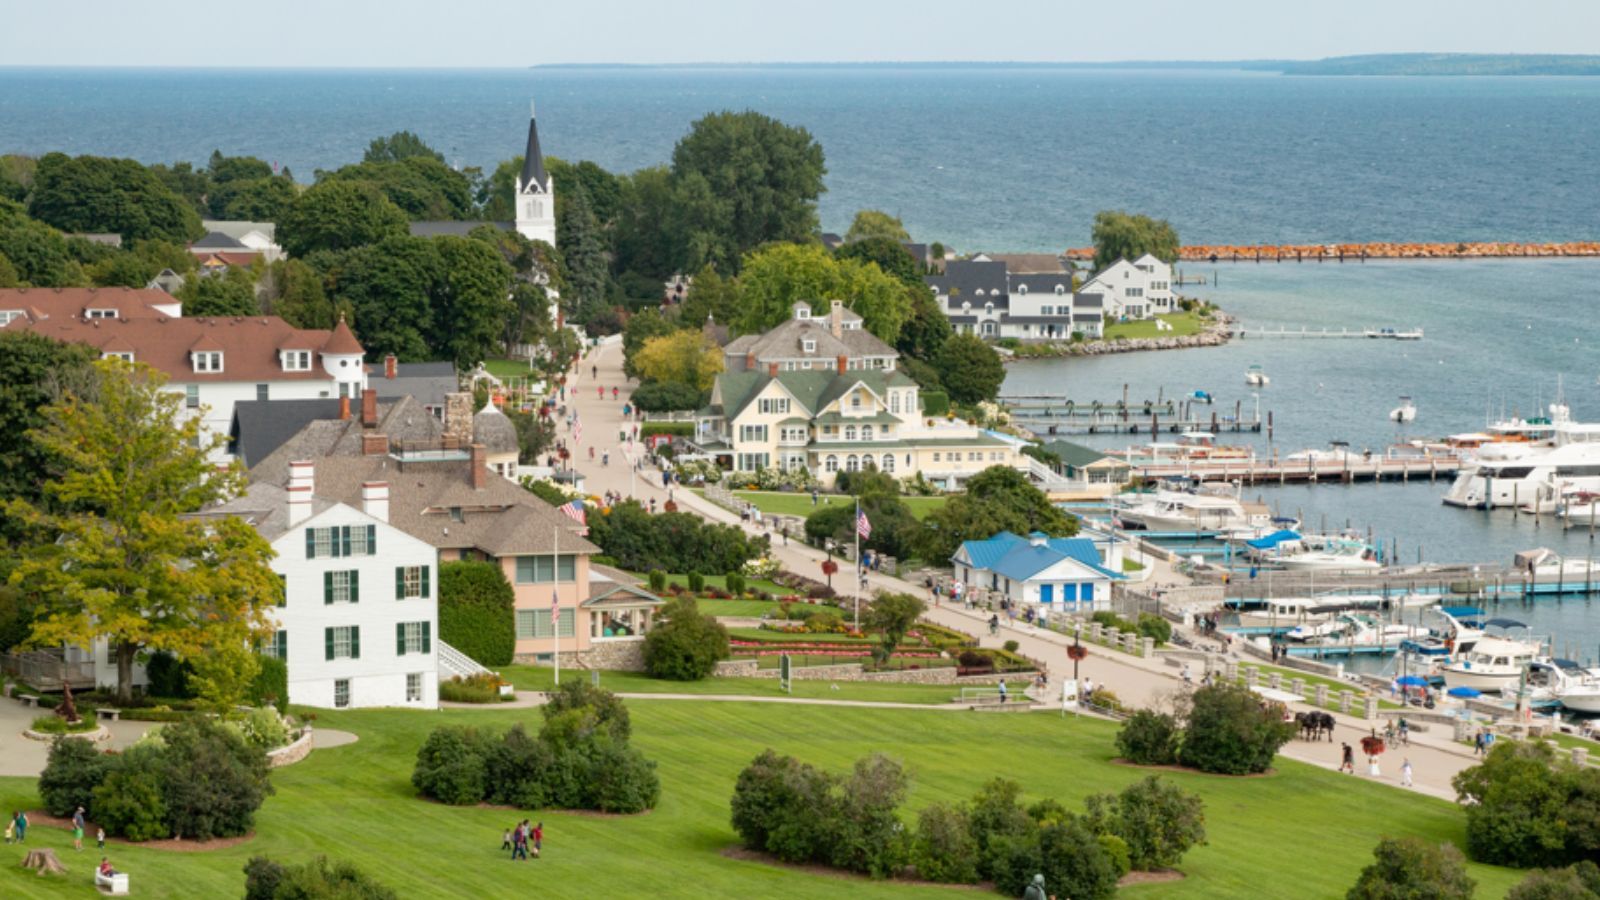 Mackinac Island: Marquette Park viewed from Fort Mackinac